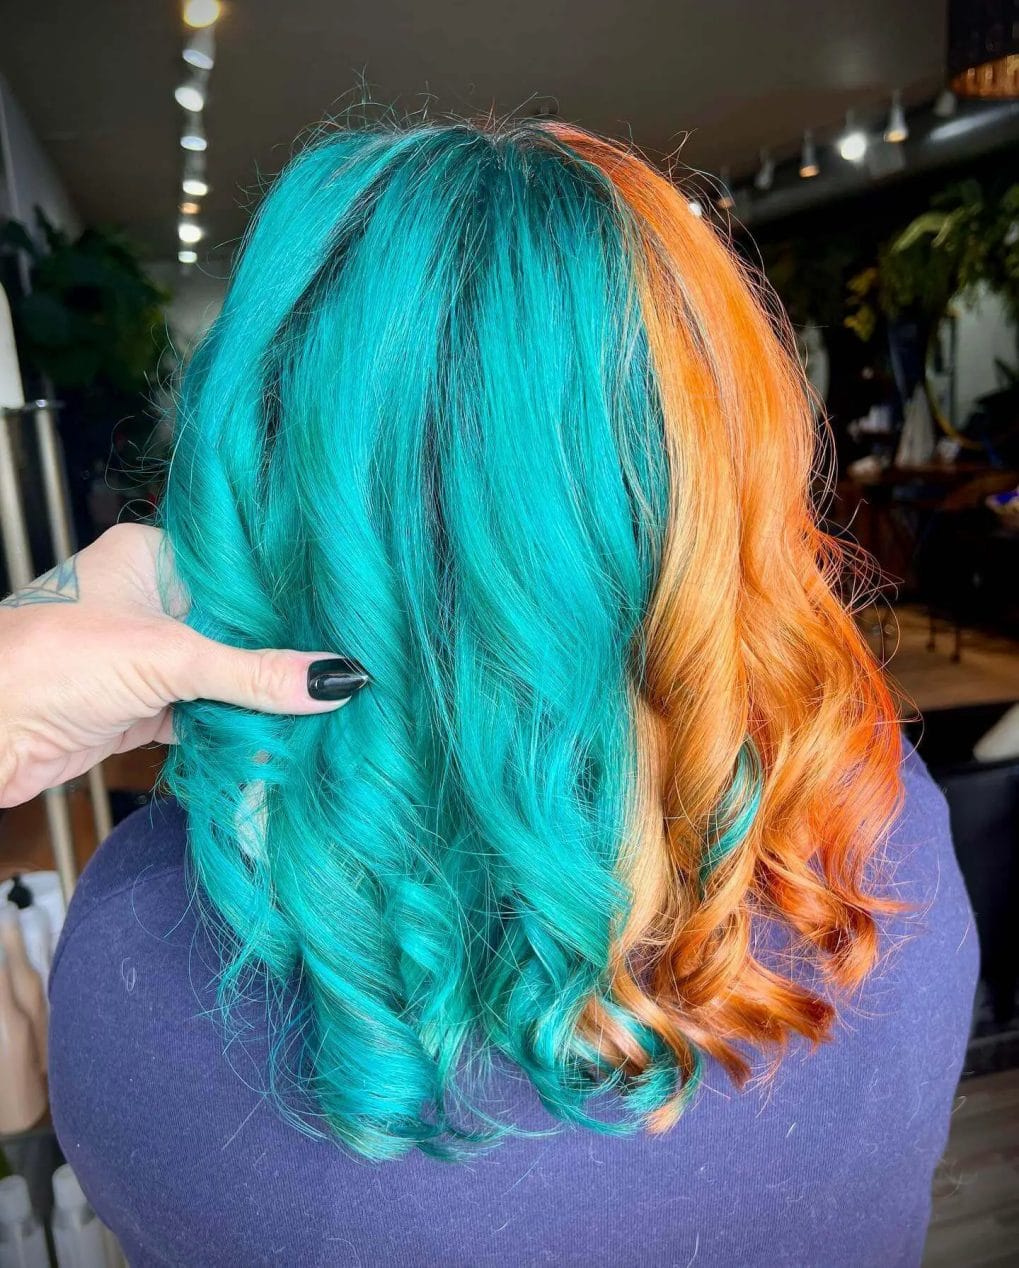 Adventurous turquoise and orange split dye with lively curls